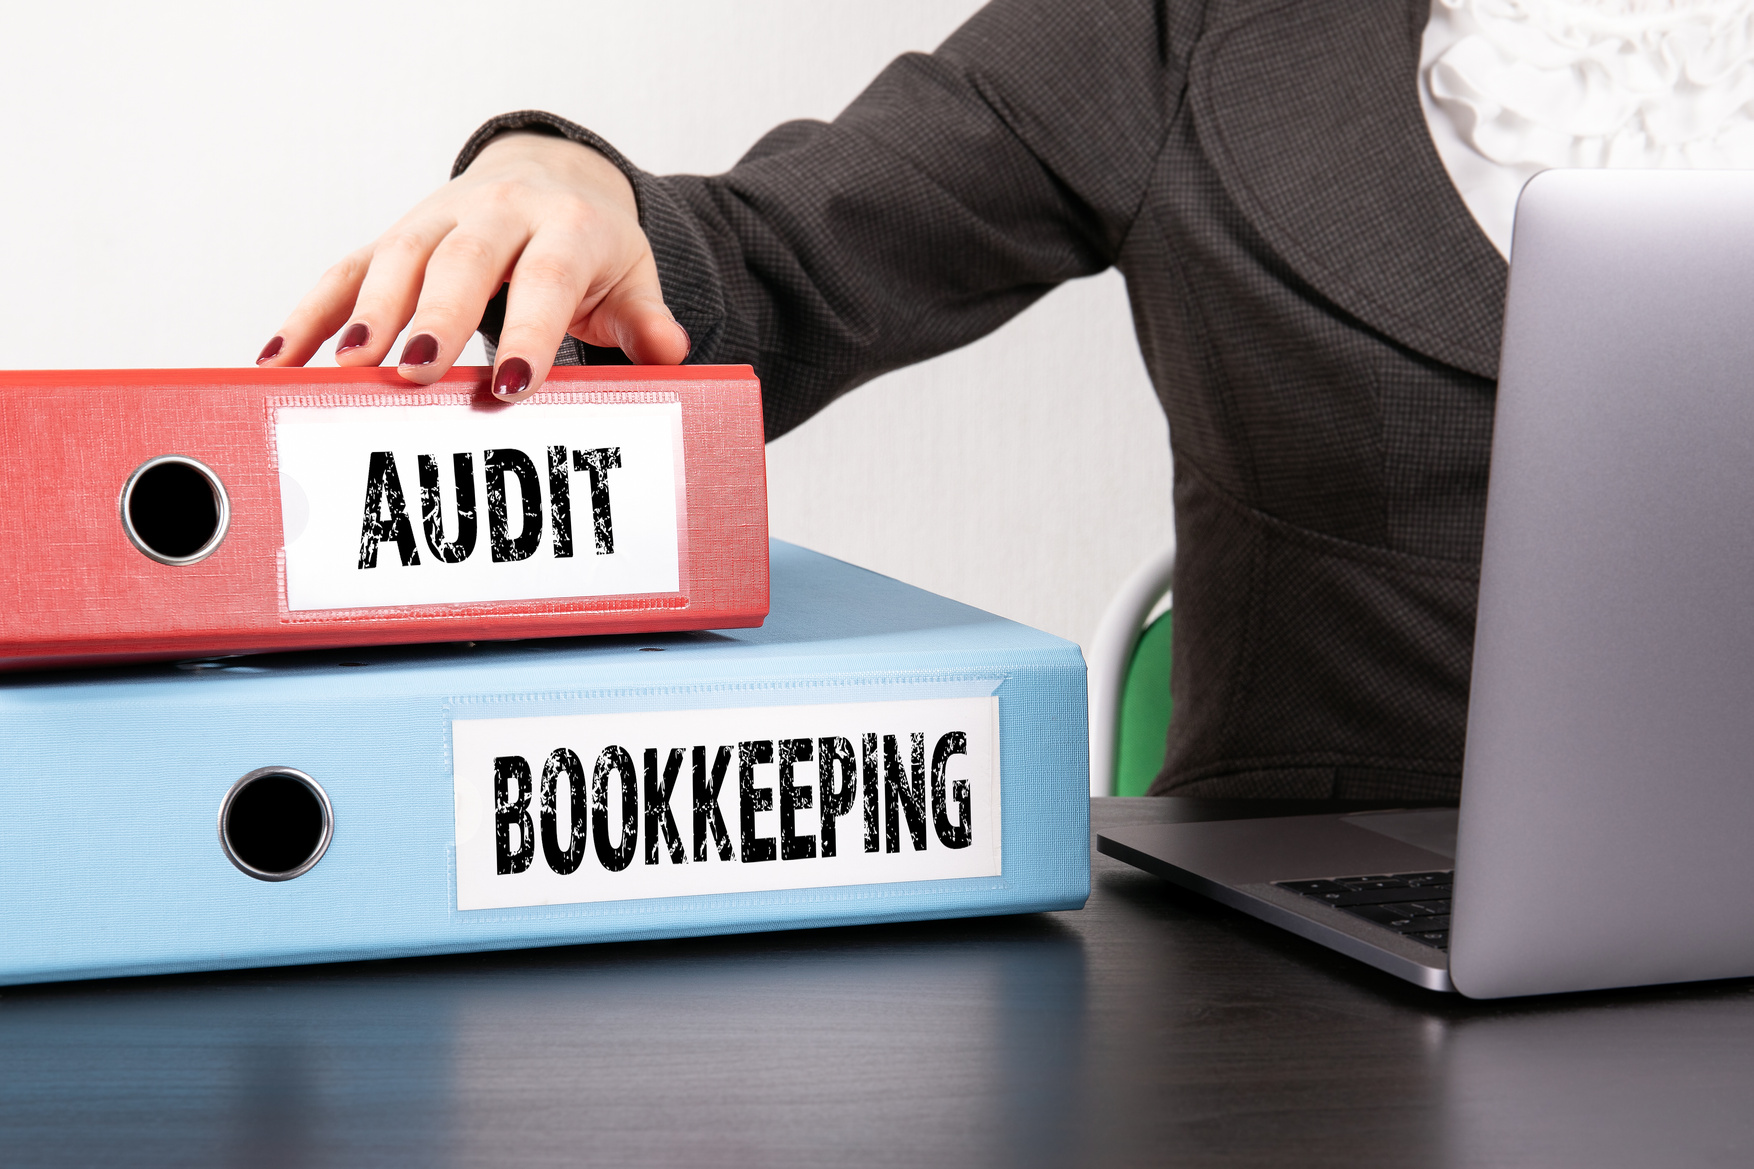 Audit and Bookkeeping concept